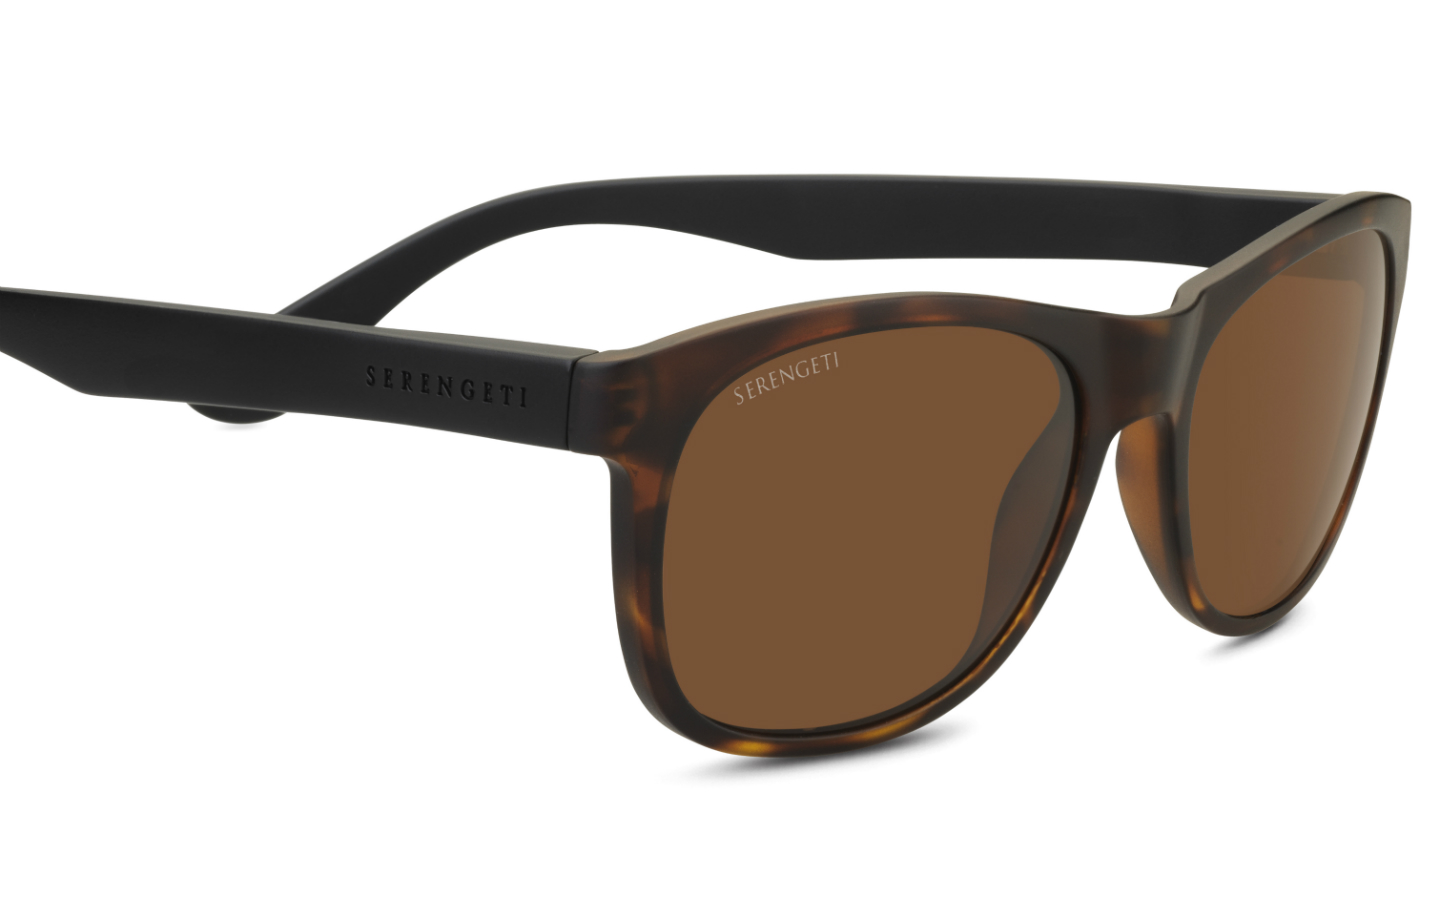 Serenget-Anteo-sunglasses-for-drivers-reviewed